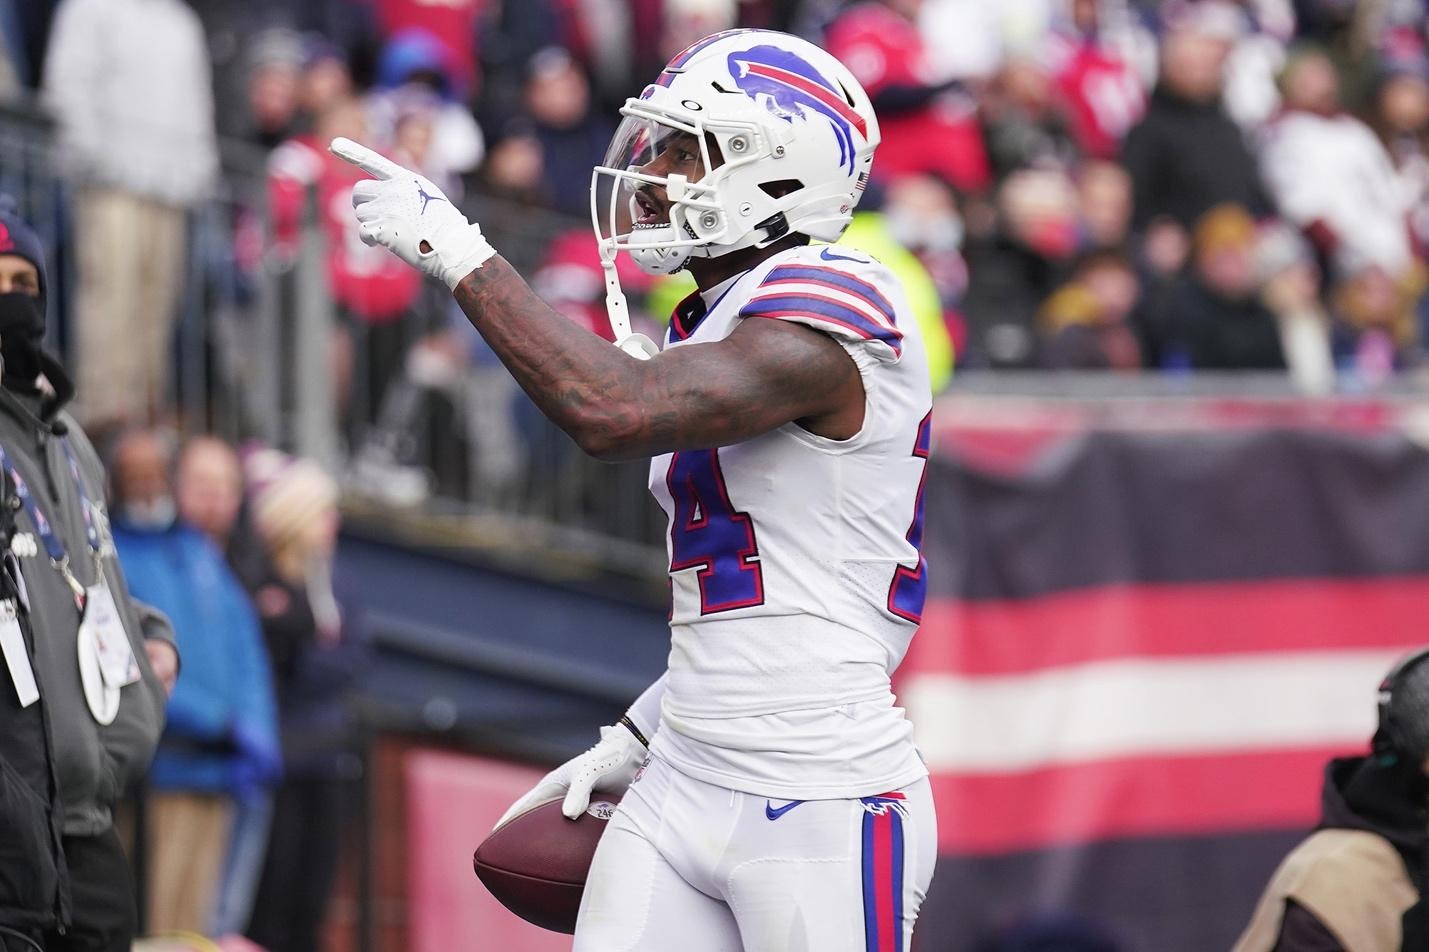 Stefon Diggs tells Patriots fans to 'shut the f--k up' after TD